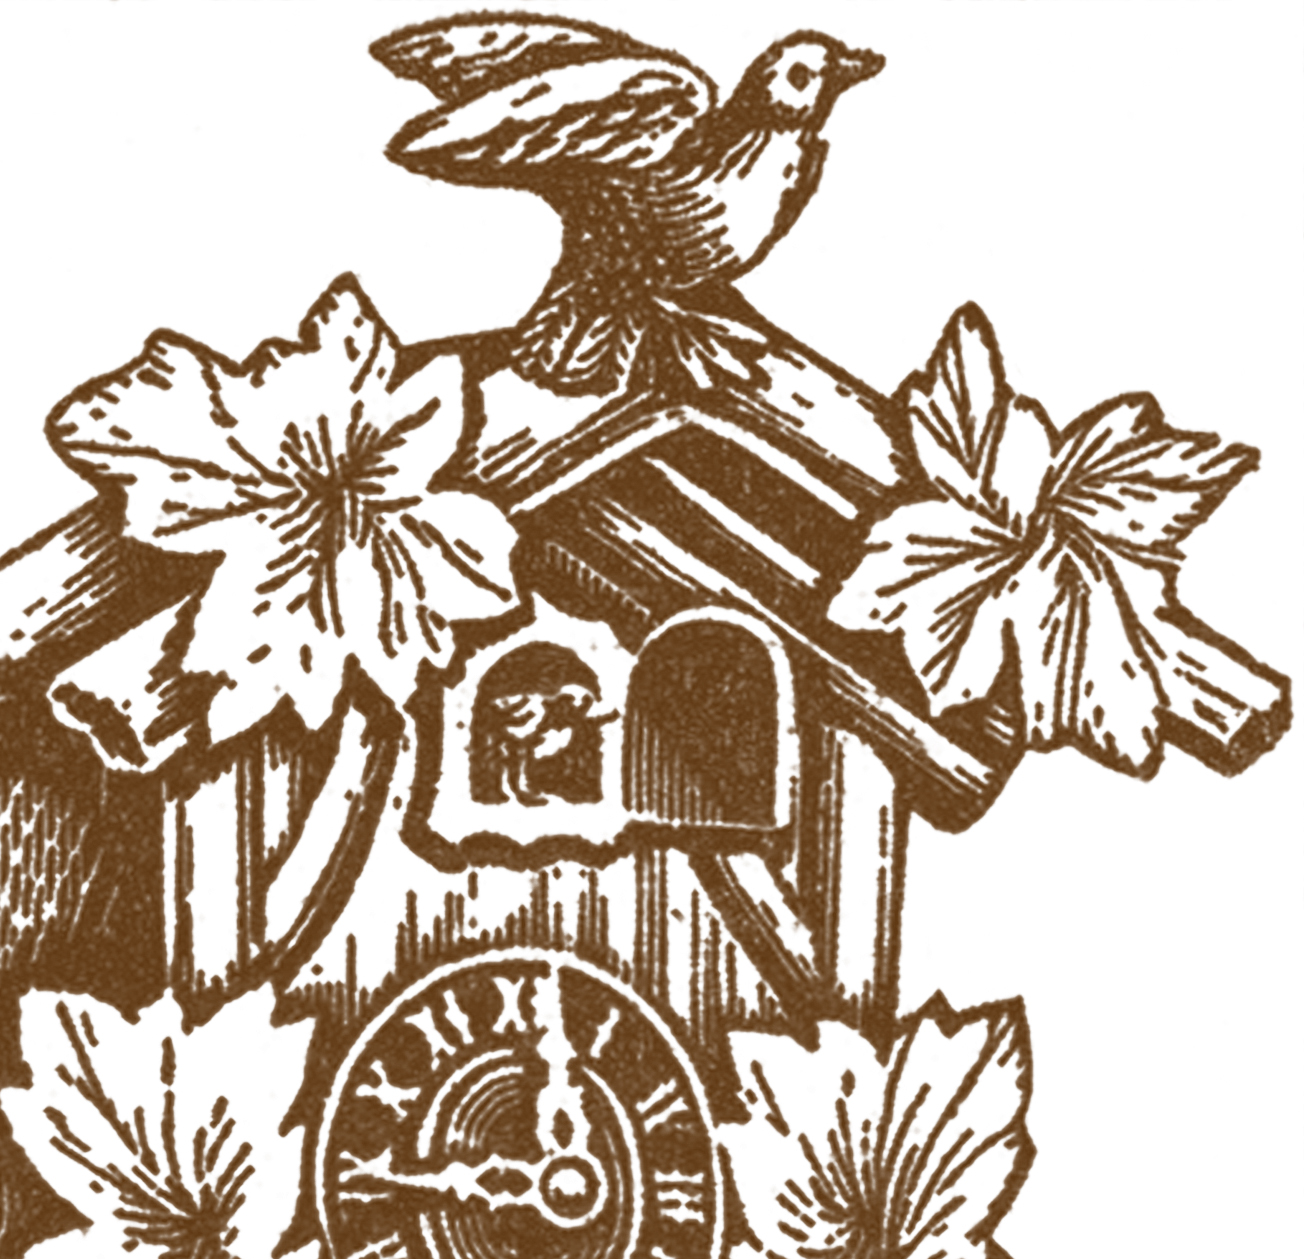 Download Vintage Cuckoo Clock Images - The Graphics Fairy